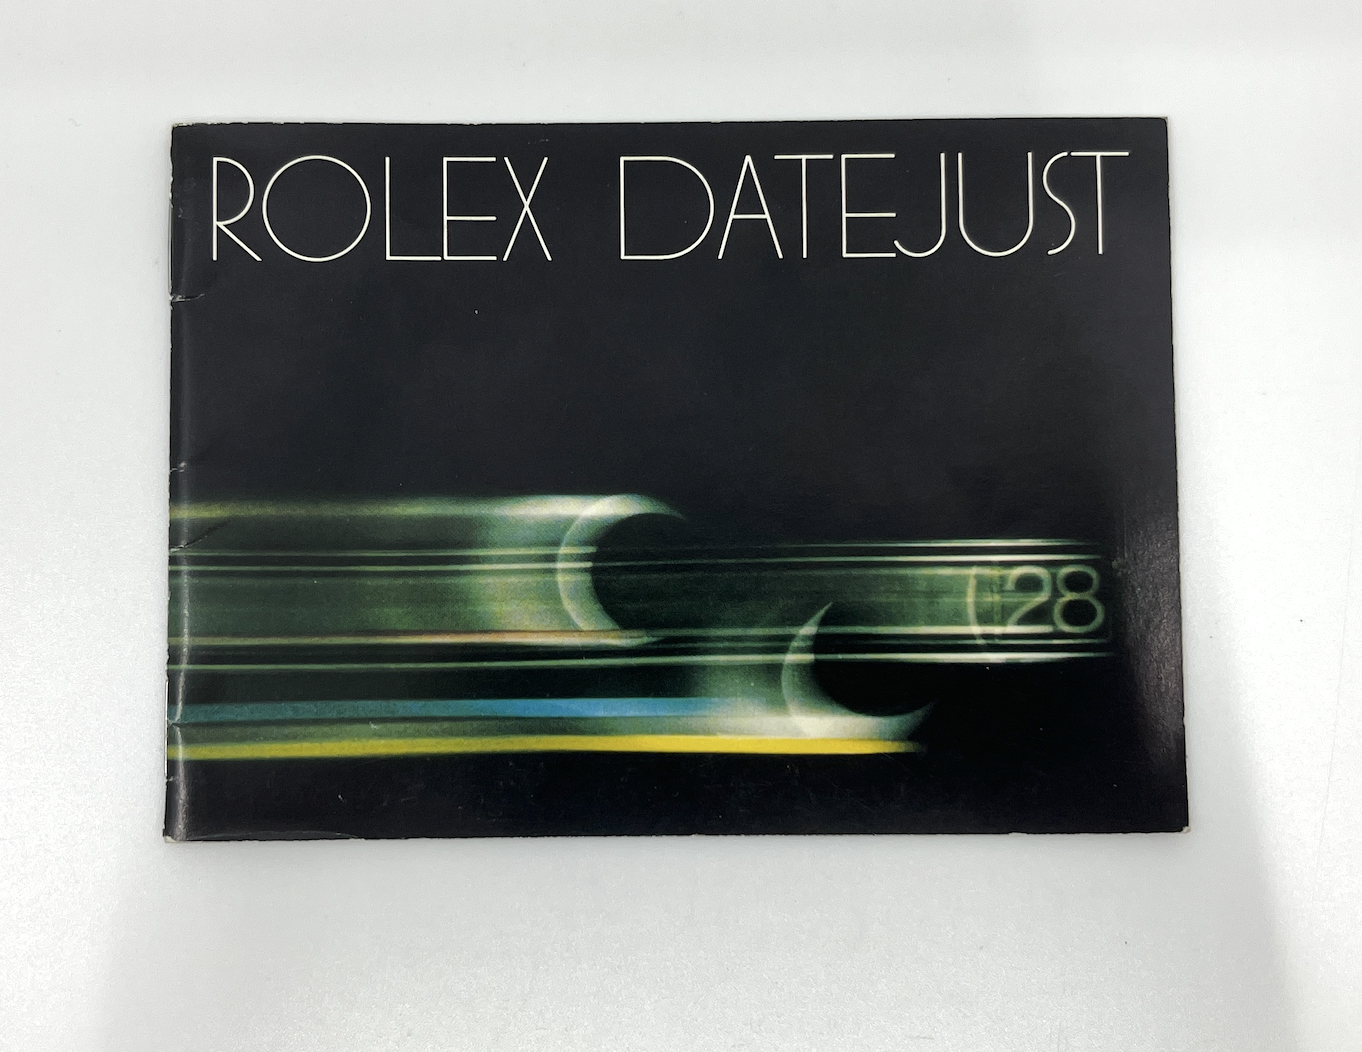 pre owned Rolex DATE JUST Booklet